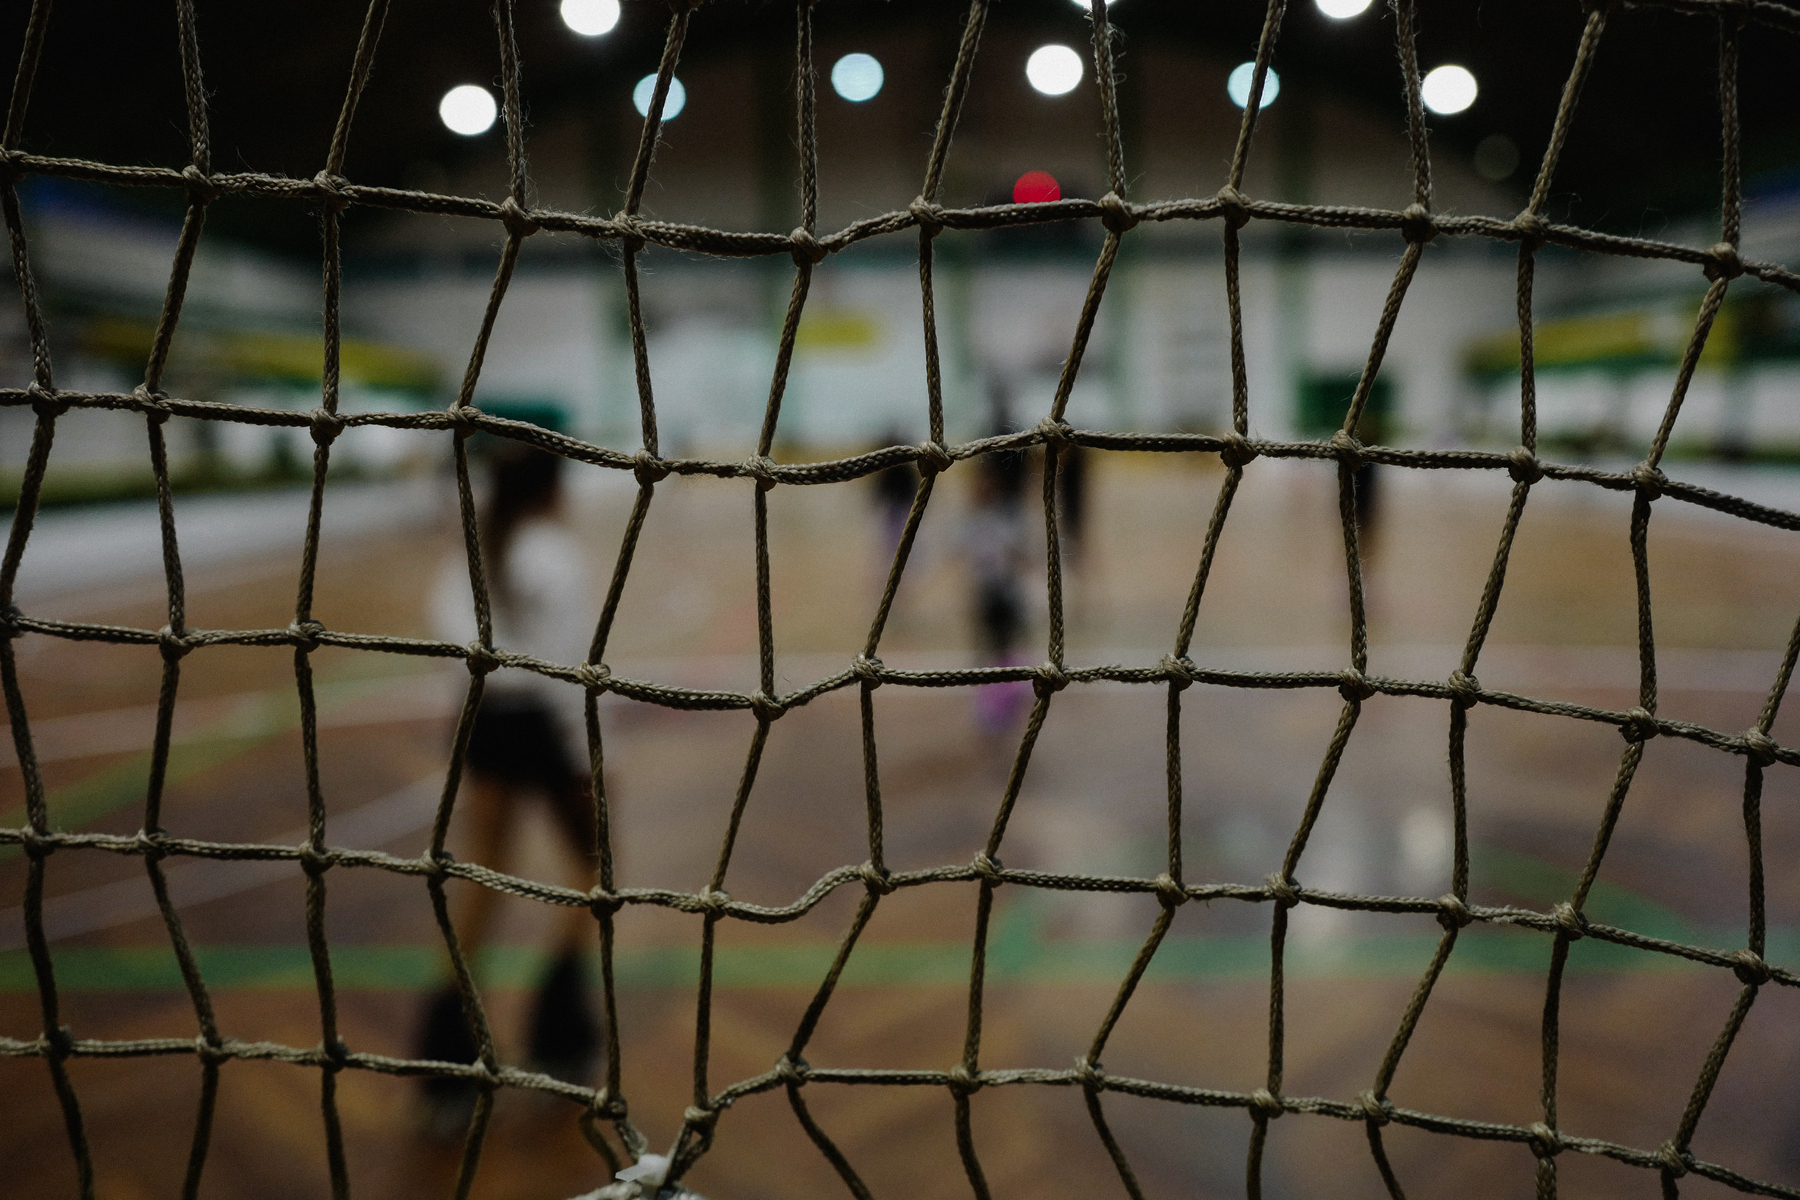 A close-up view of a net with a blurred scene of players on the court in the background.